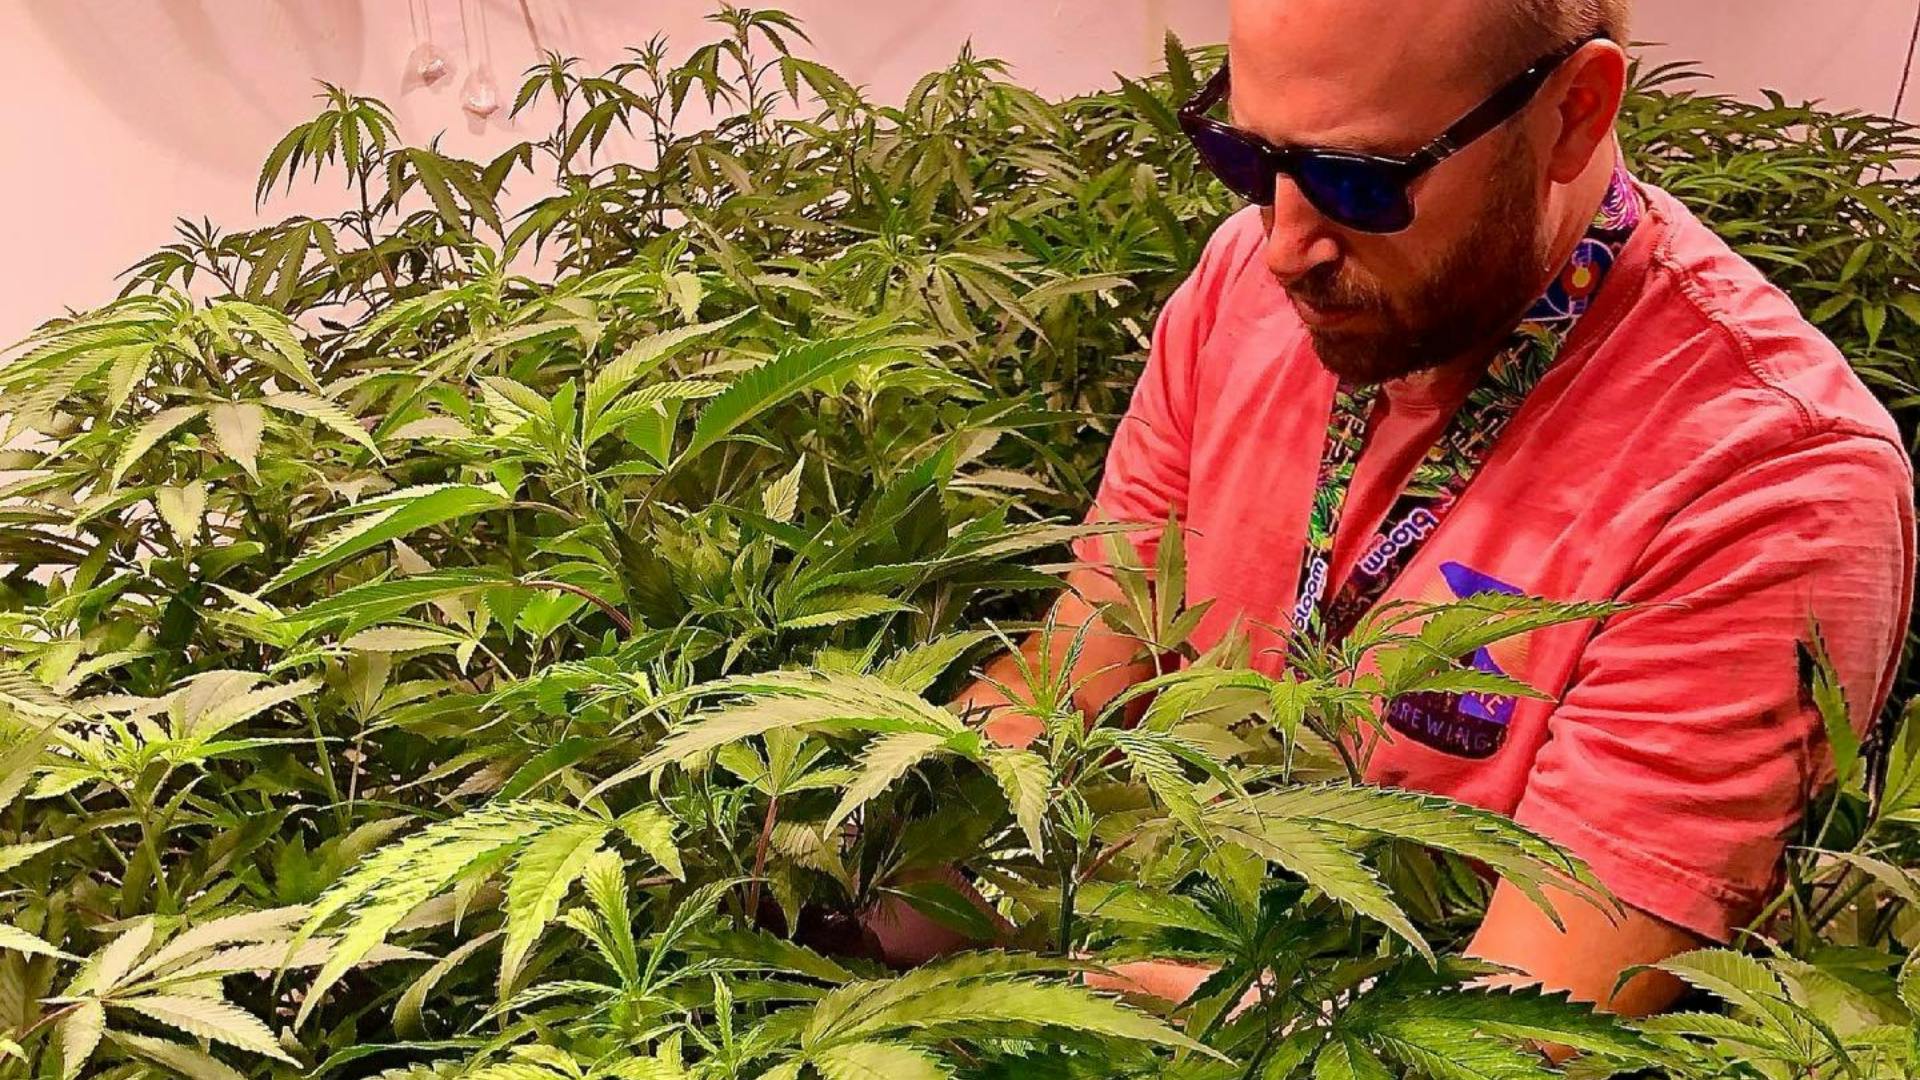 A man in sunglasses stands in the middle of thriving cannabis plants inside a grow room. The plants reach  the man's shoulders